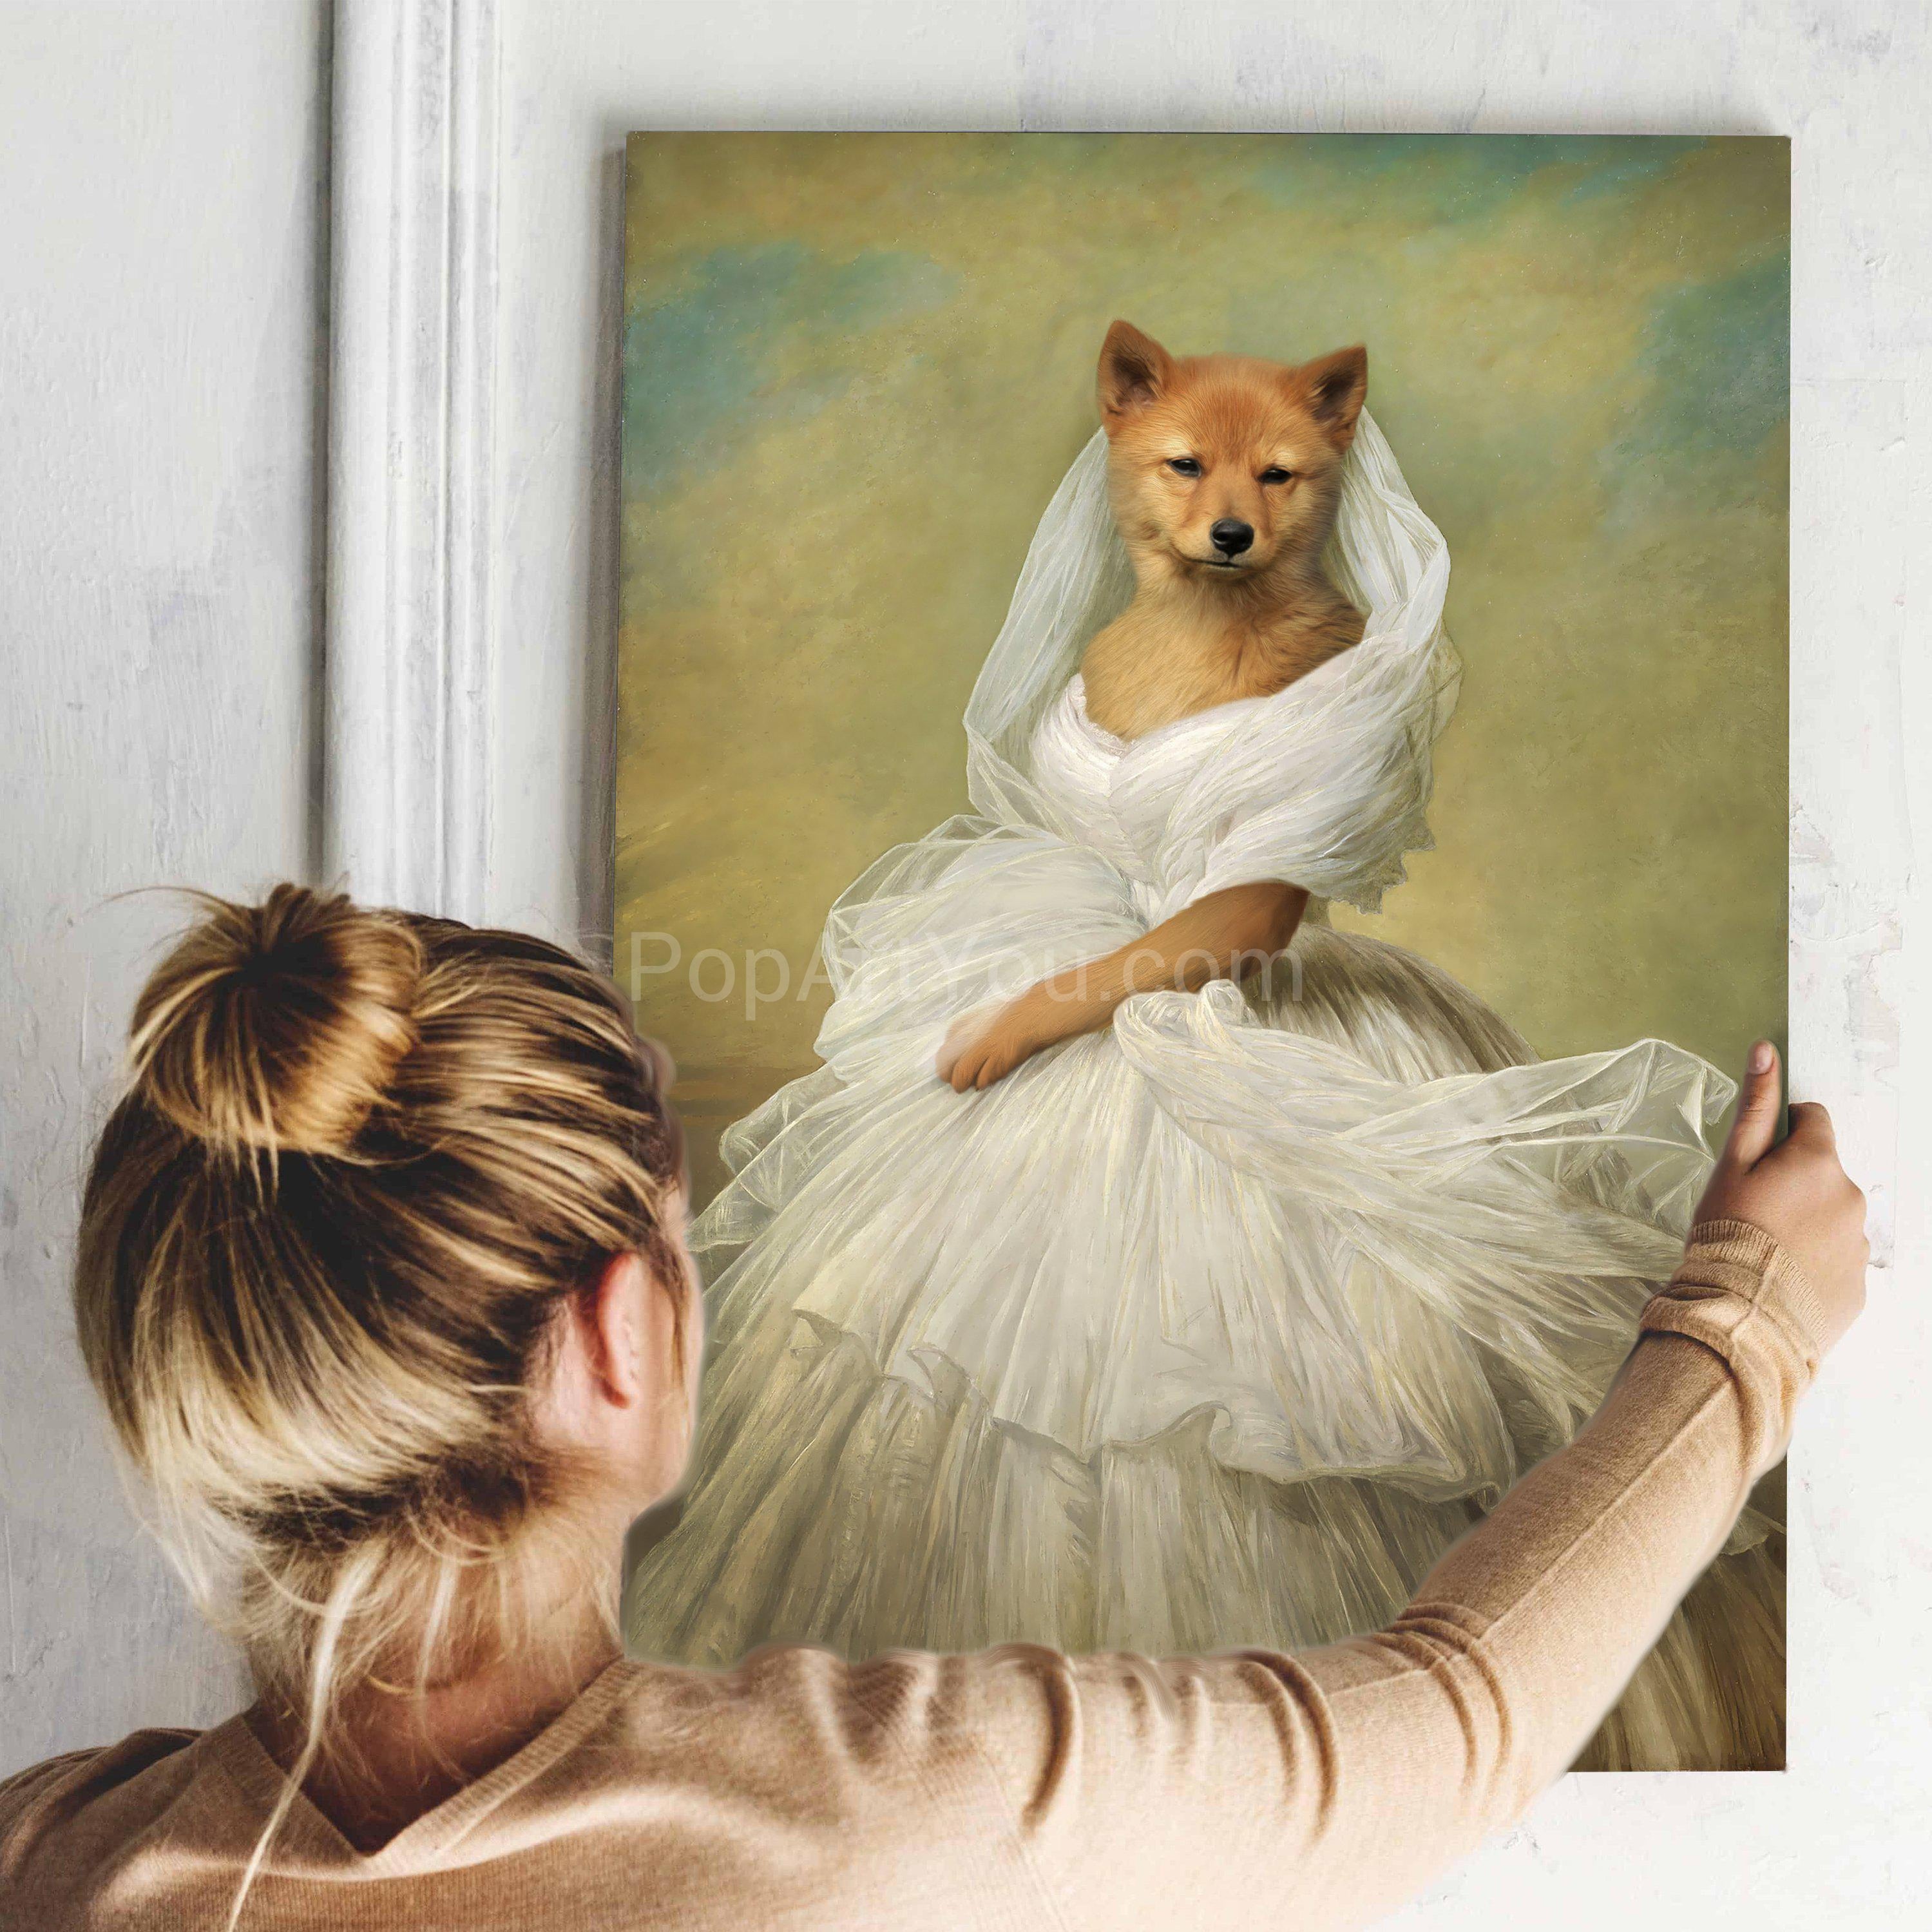 A woman stands near a portrait of a female dog with a human body dressed in a white royal princess dress